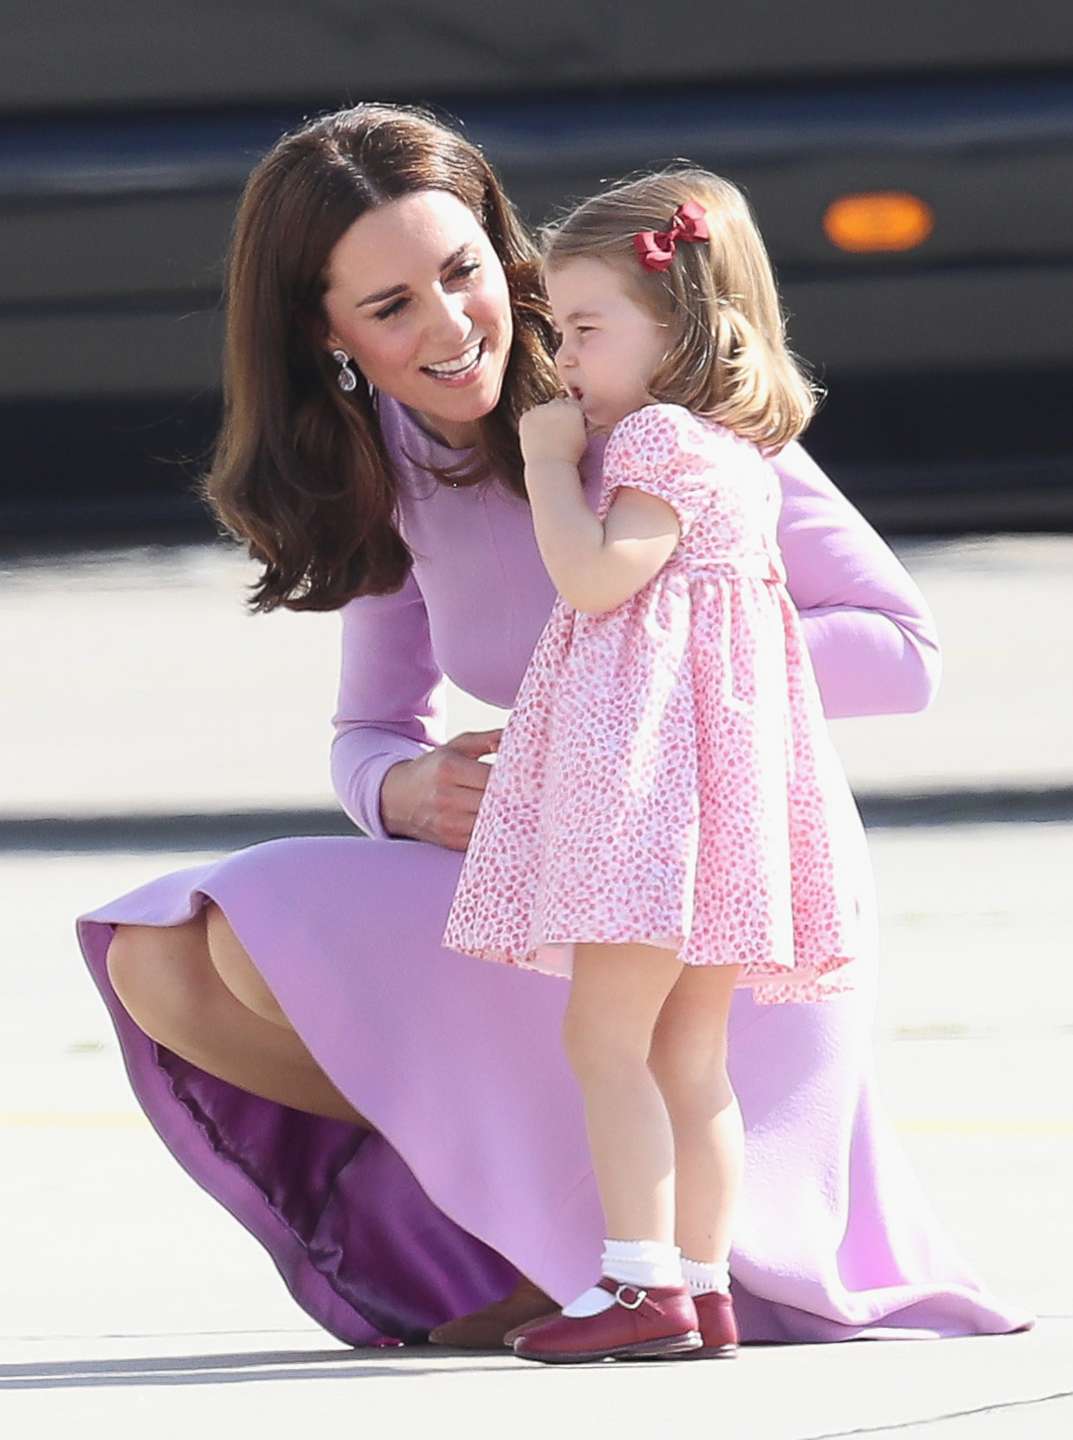 PHOTO: Catherine, Duchess of Cambridge, and Princess Charlotte of Cambridge view helicopter models H145 and H135 before departing from Hamburg airport on the last day of their official visit to Poland and Germany on July 21, 2017 in Hamburg.